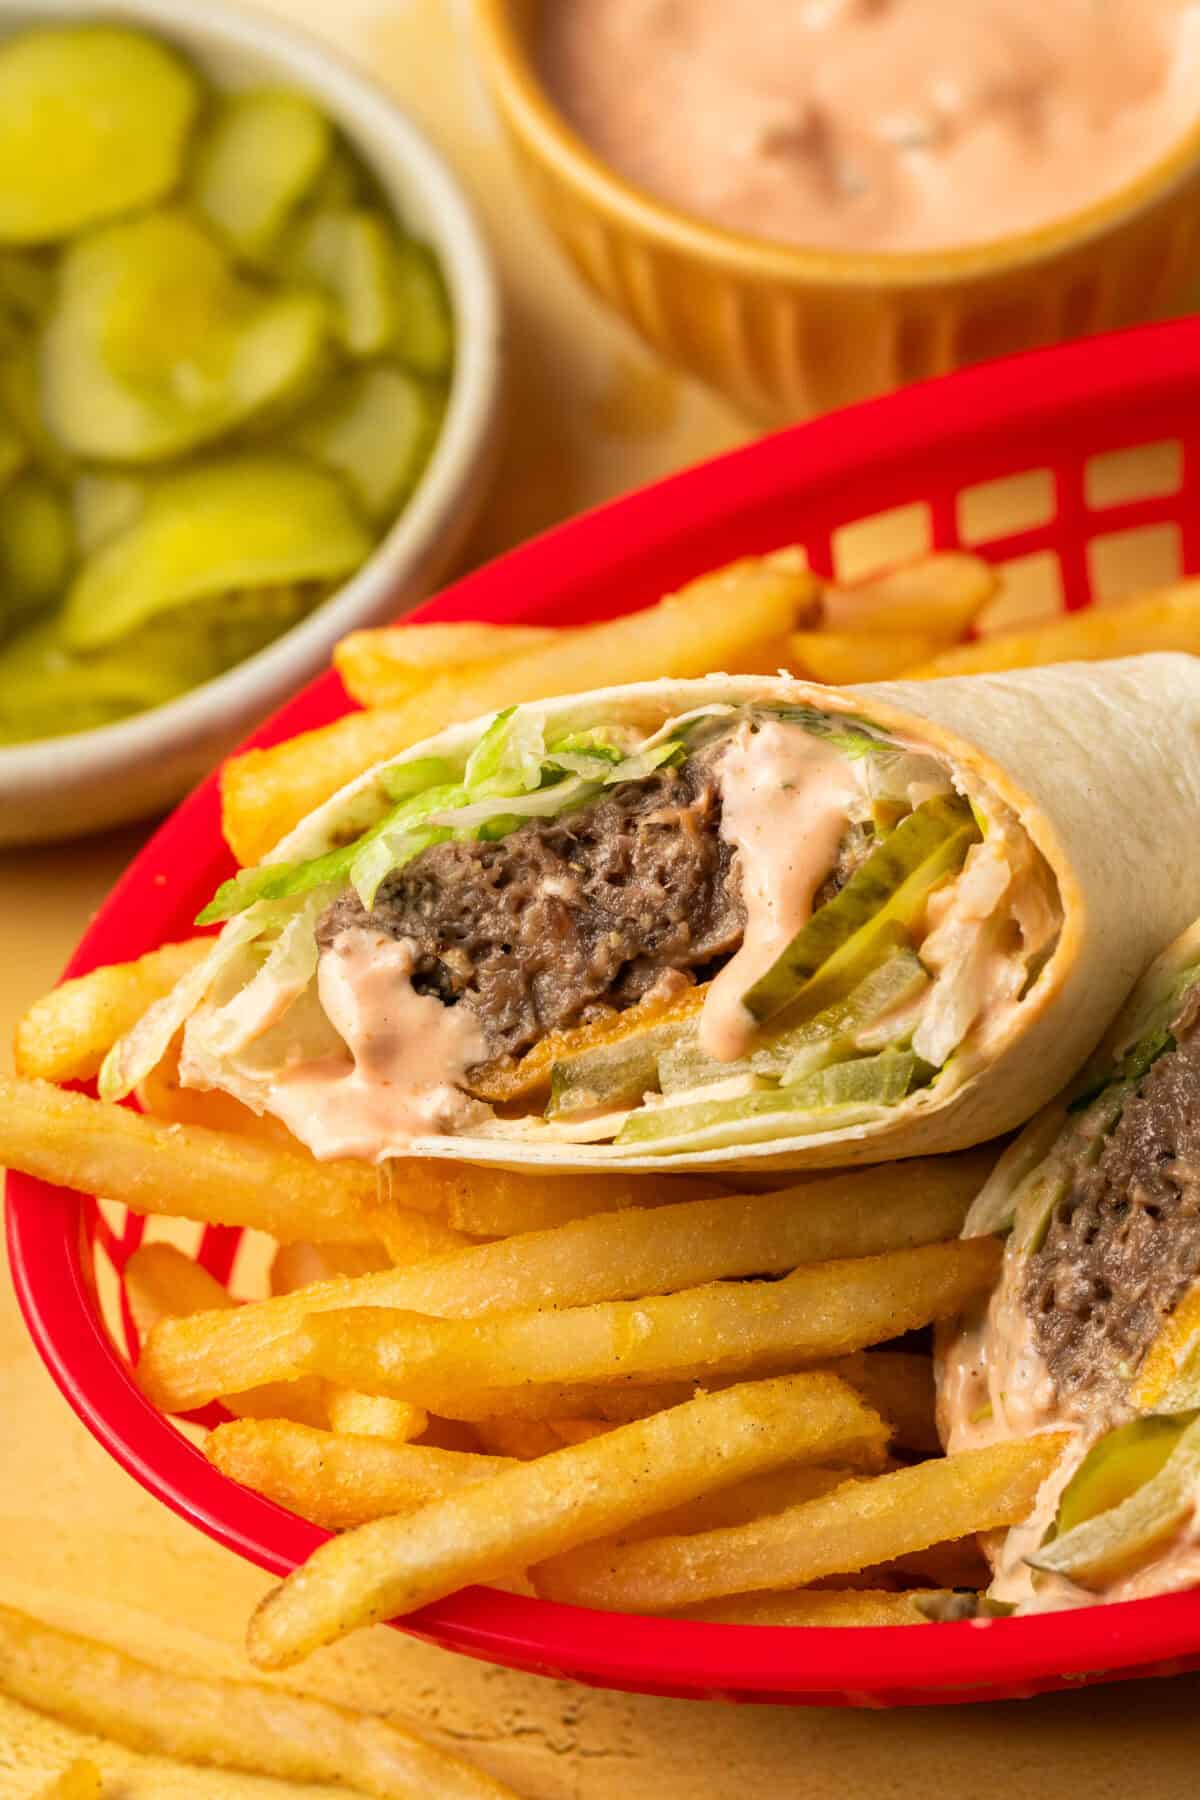 Big Mac wrap in a basket full of french fries. 